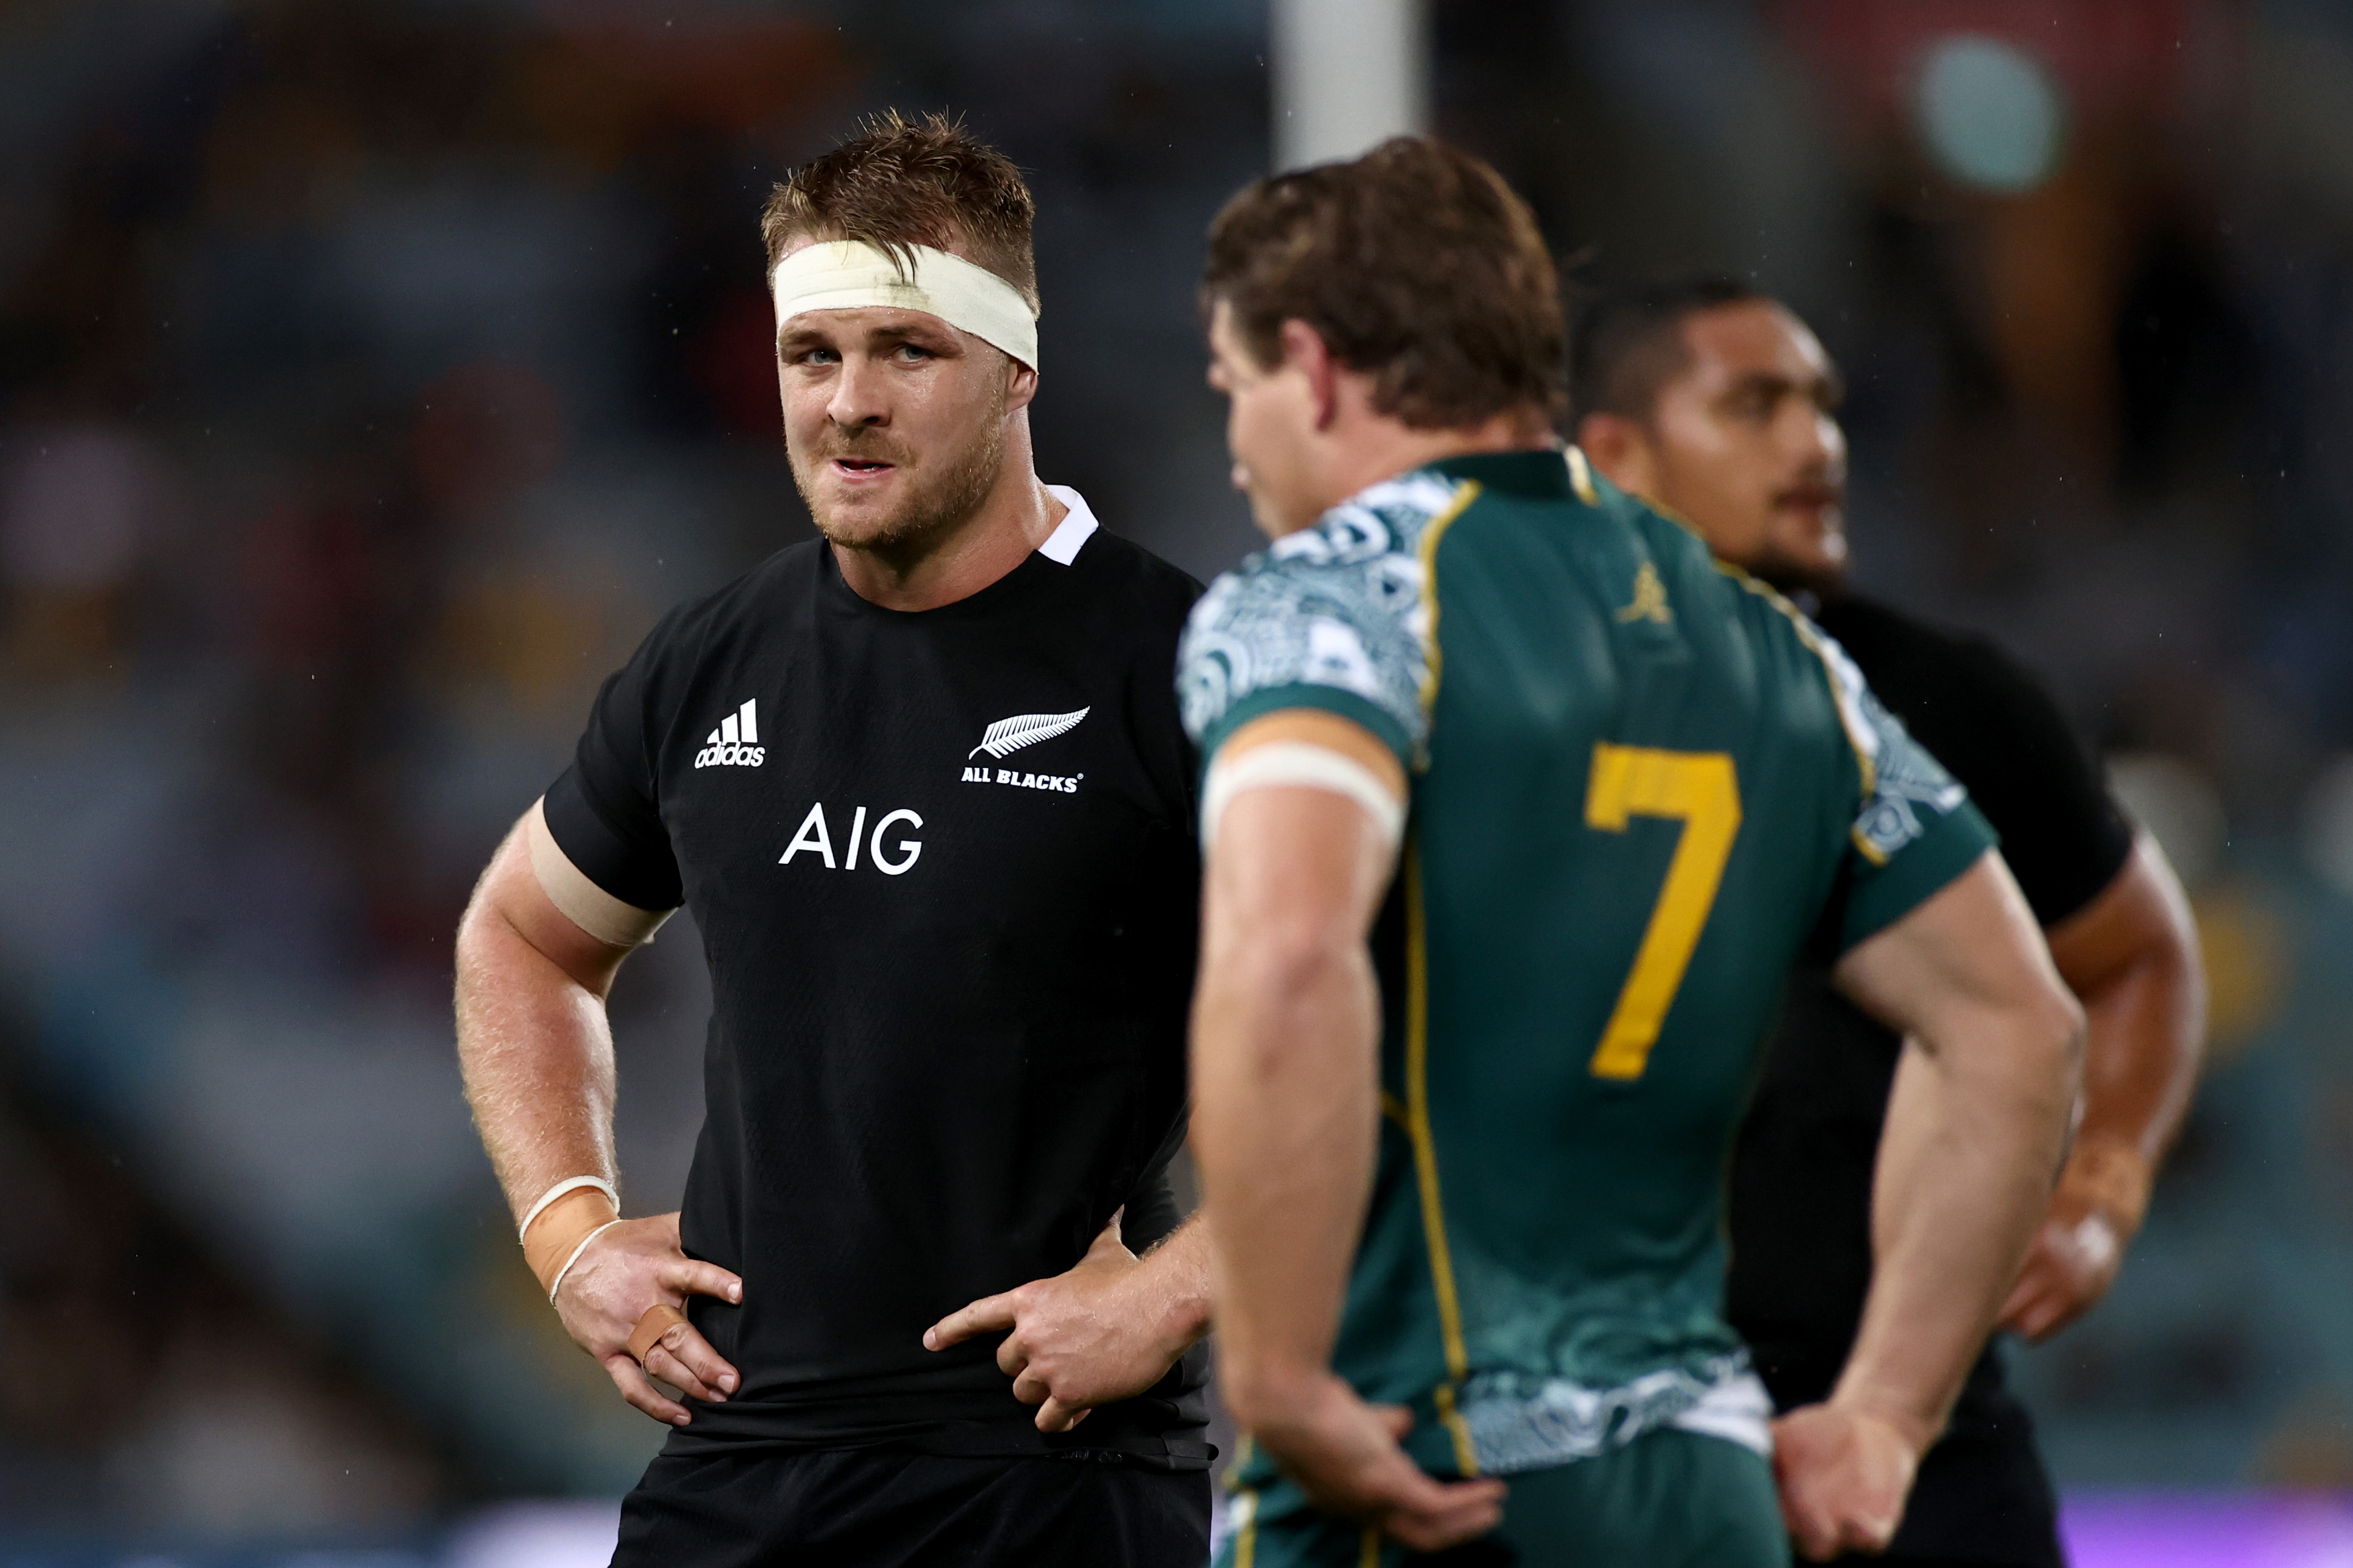 Sam Cane of the All Blacks looks at Michael Hooper of the Wallabies in 2020.